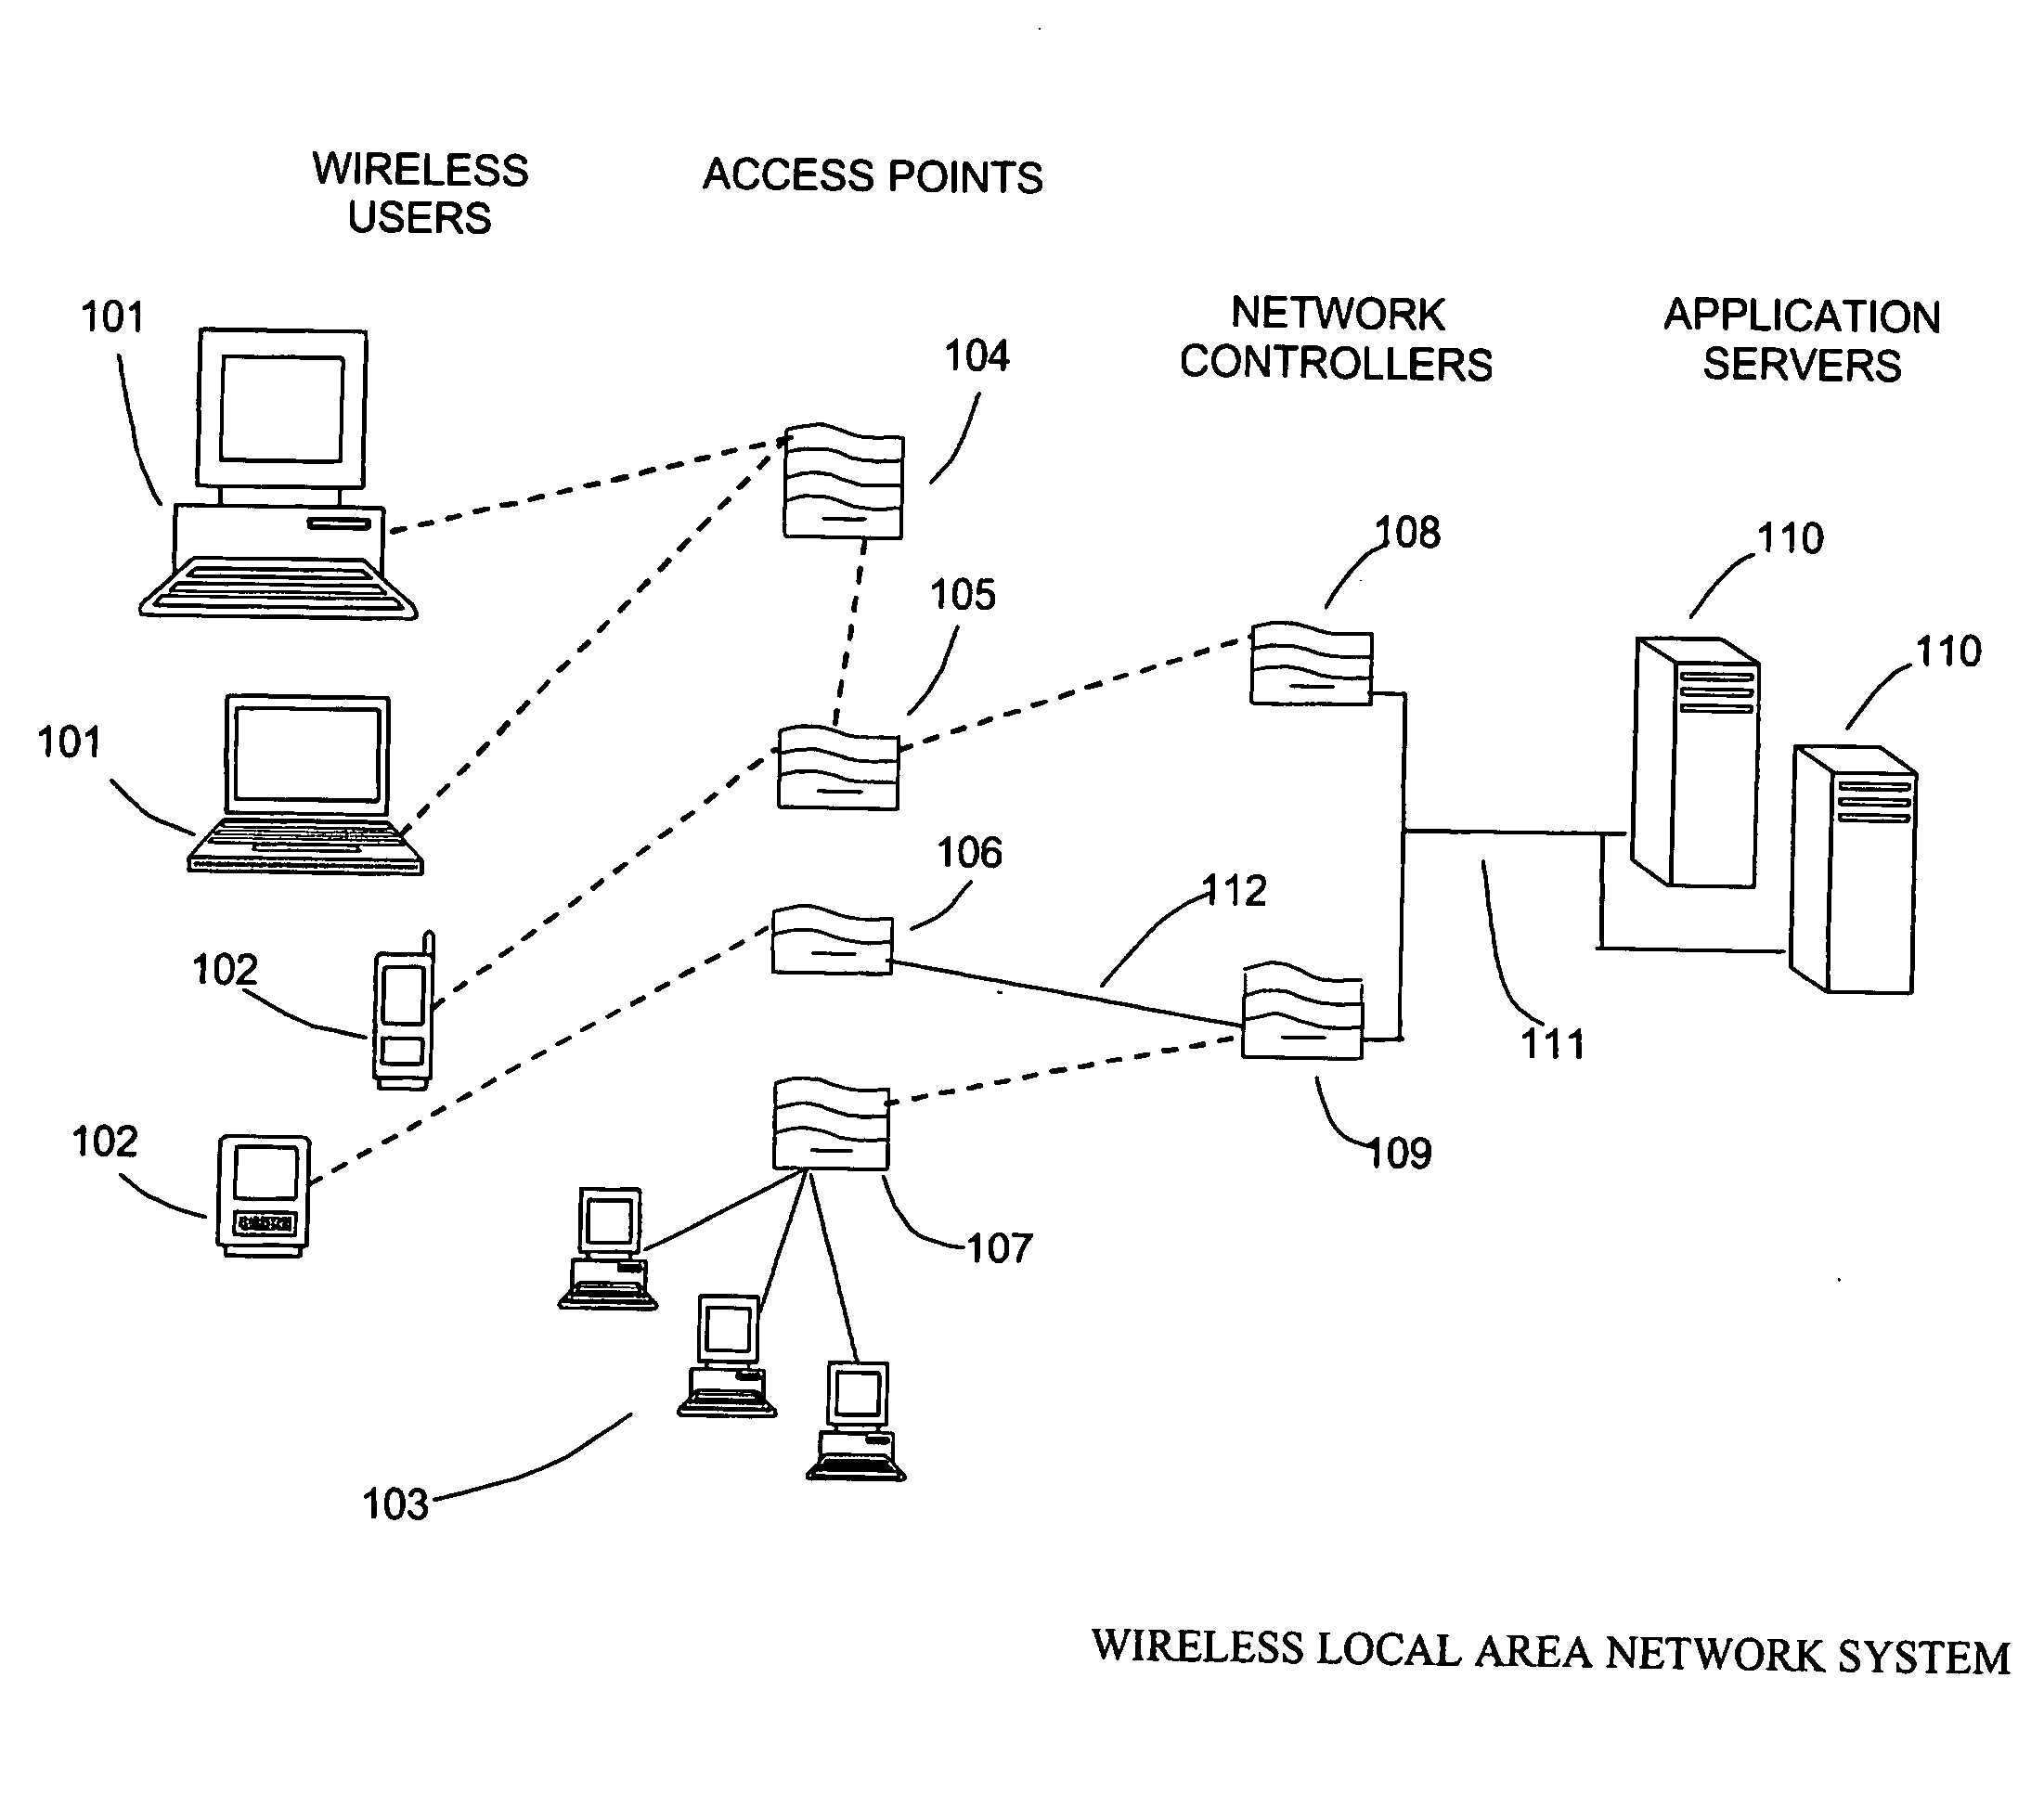 Self-configuring, self-optimizing wireless local area network system